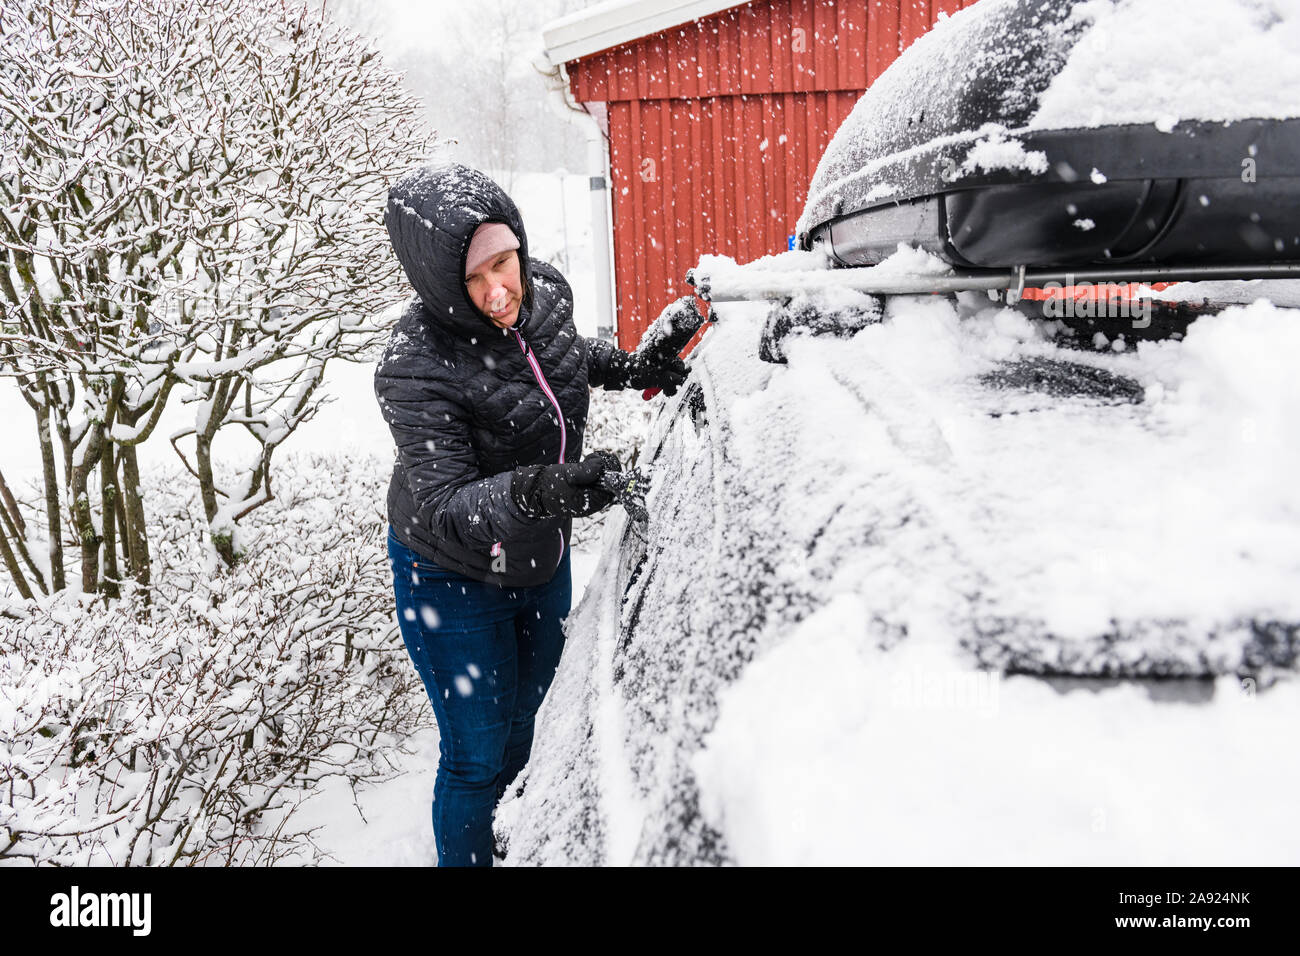 Woman clearing snow from car Stock Photo